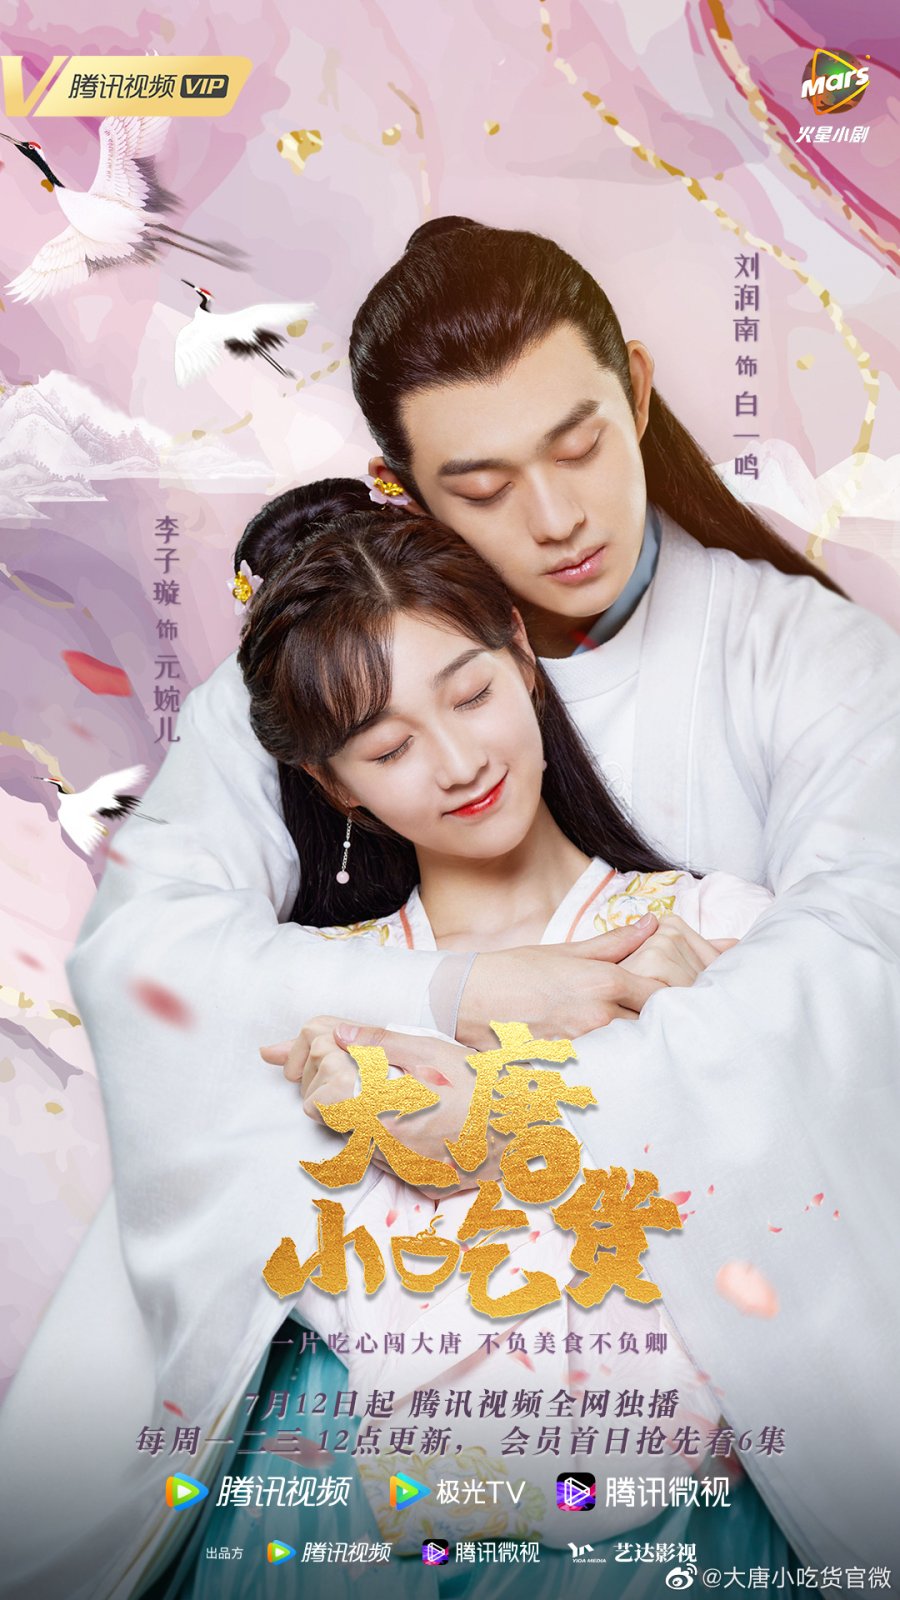 image poster from imdb - ​Gourmet in Tang Dynasty (2021)